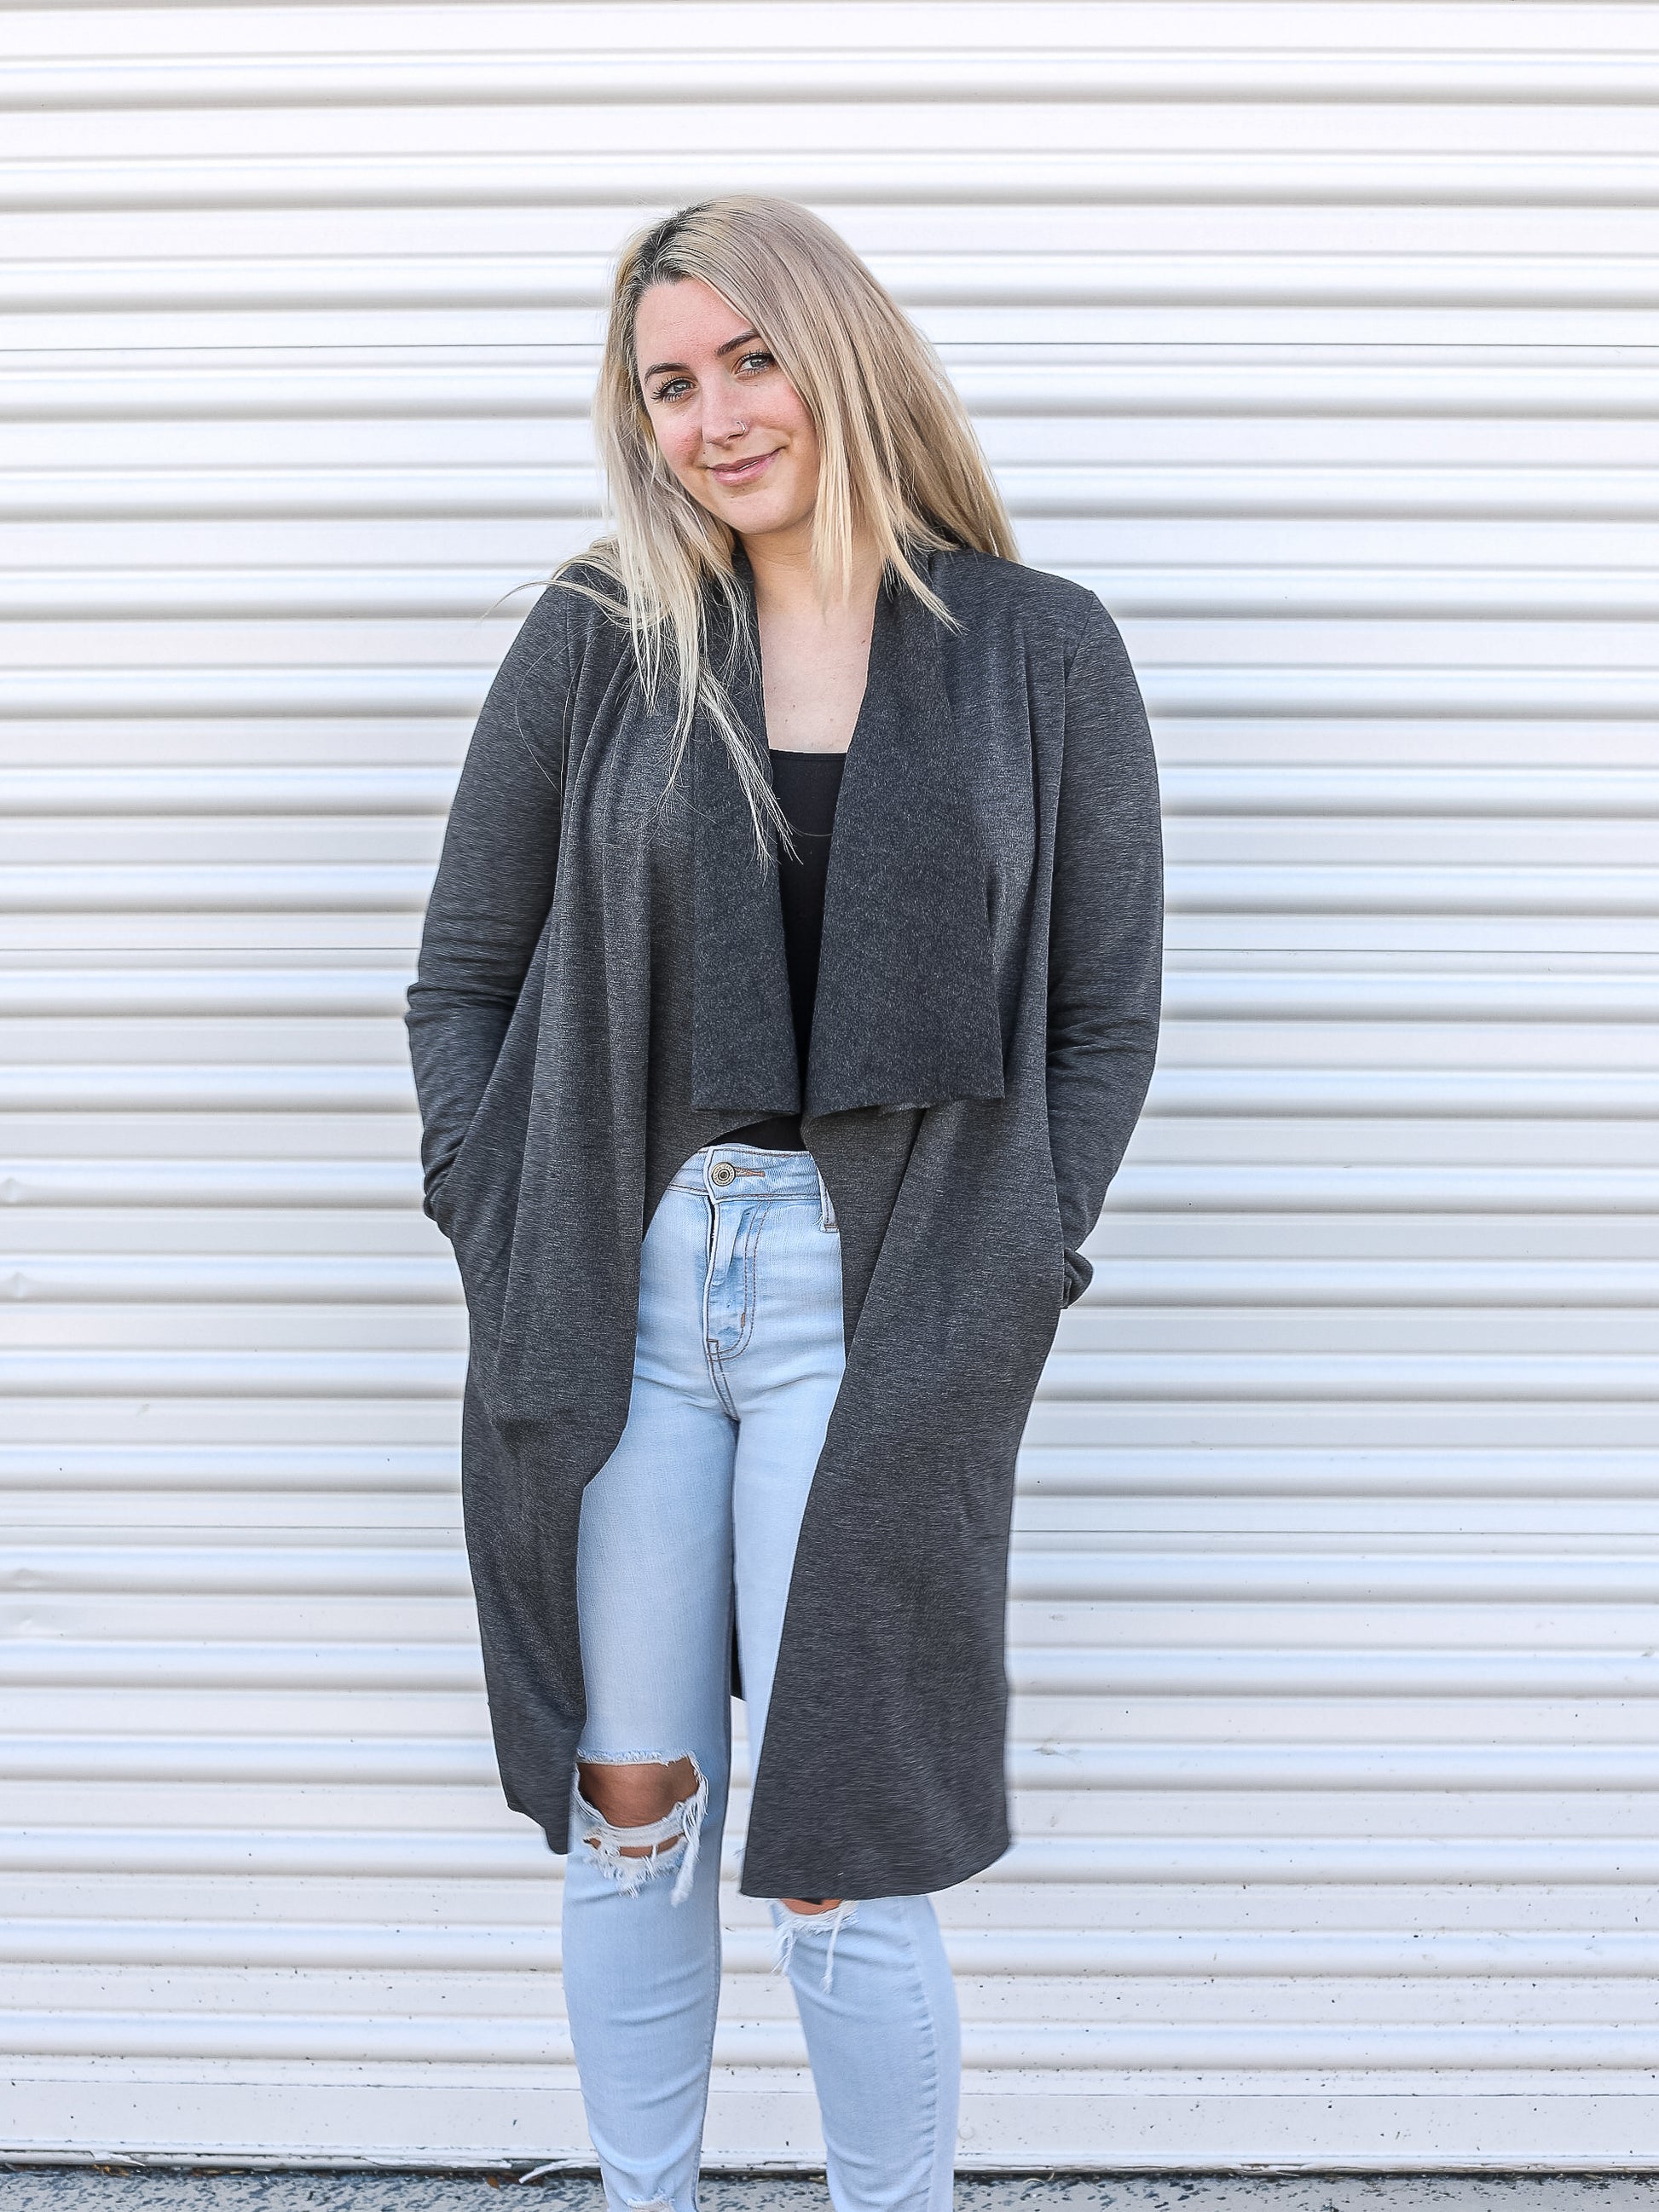 Long cardigan styled with light denim and a tank top